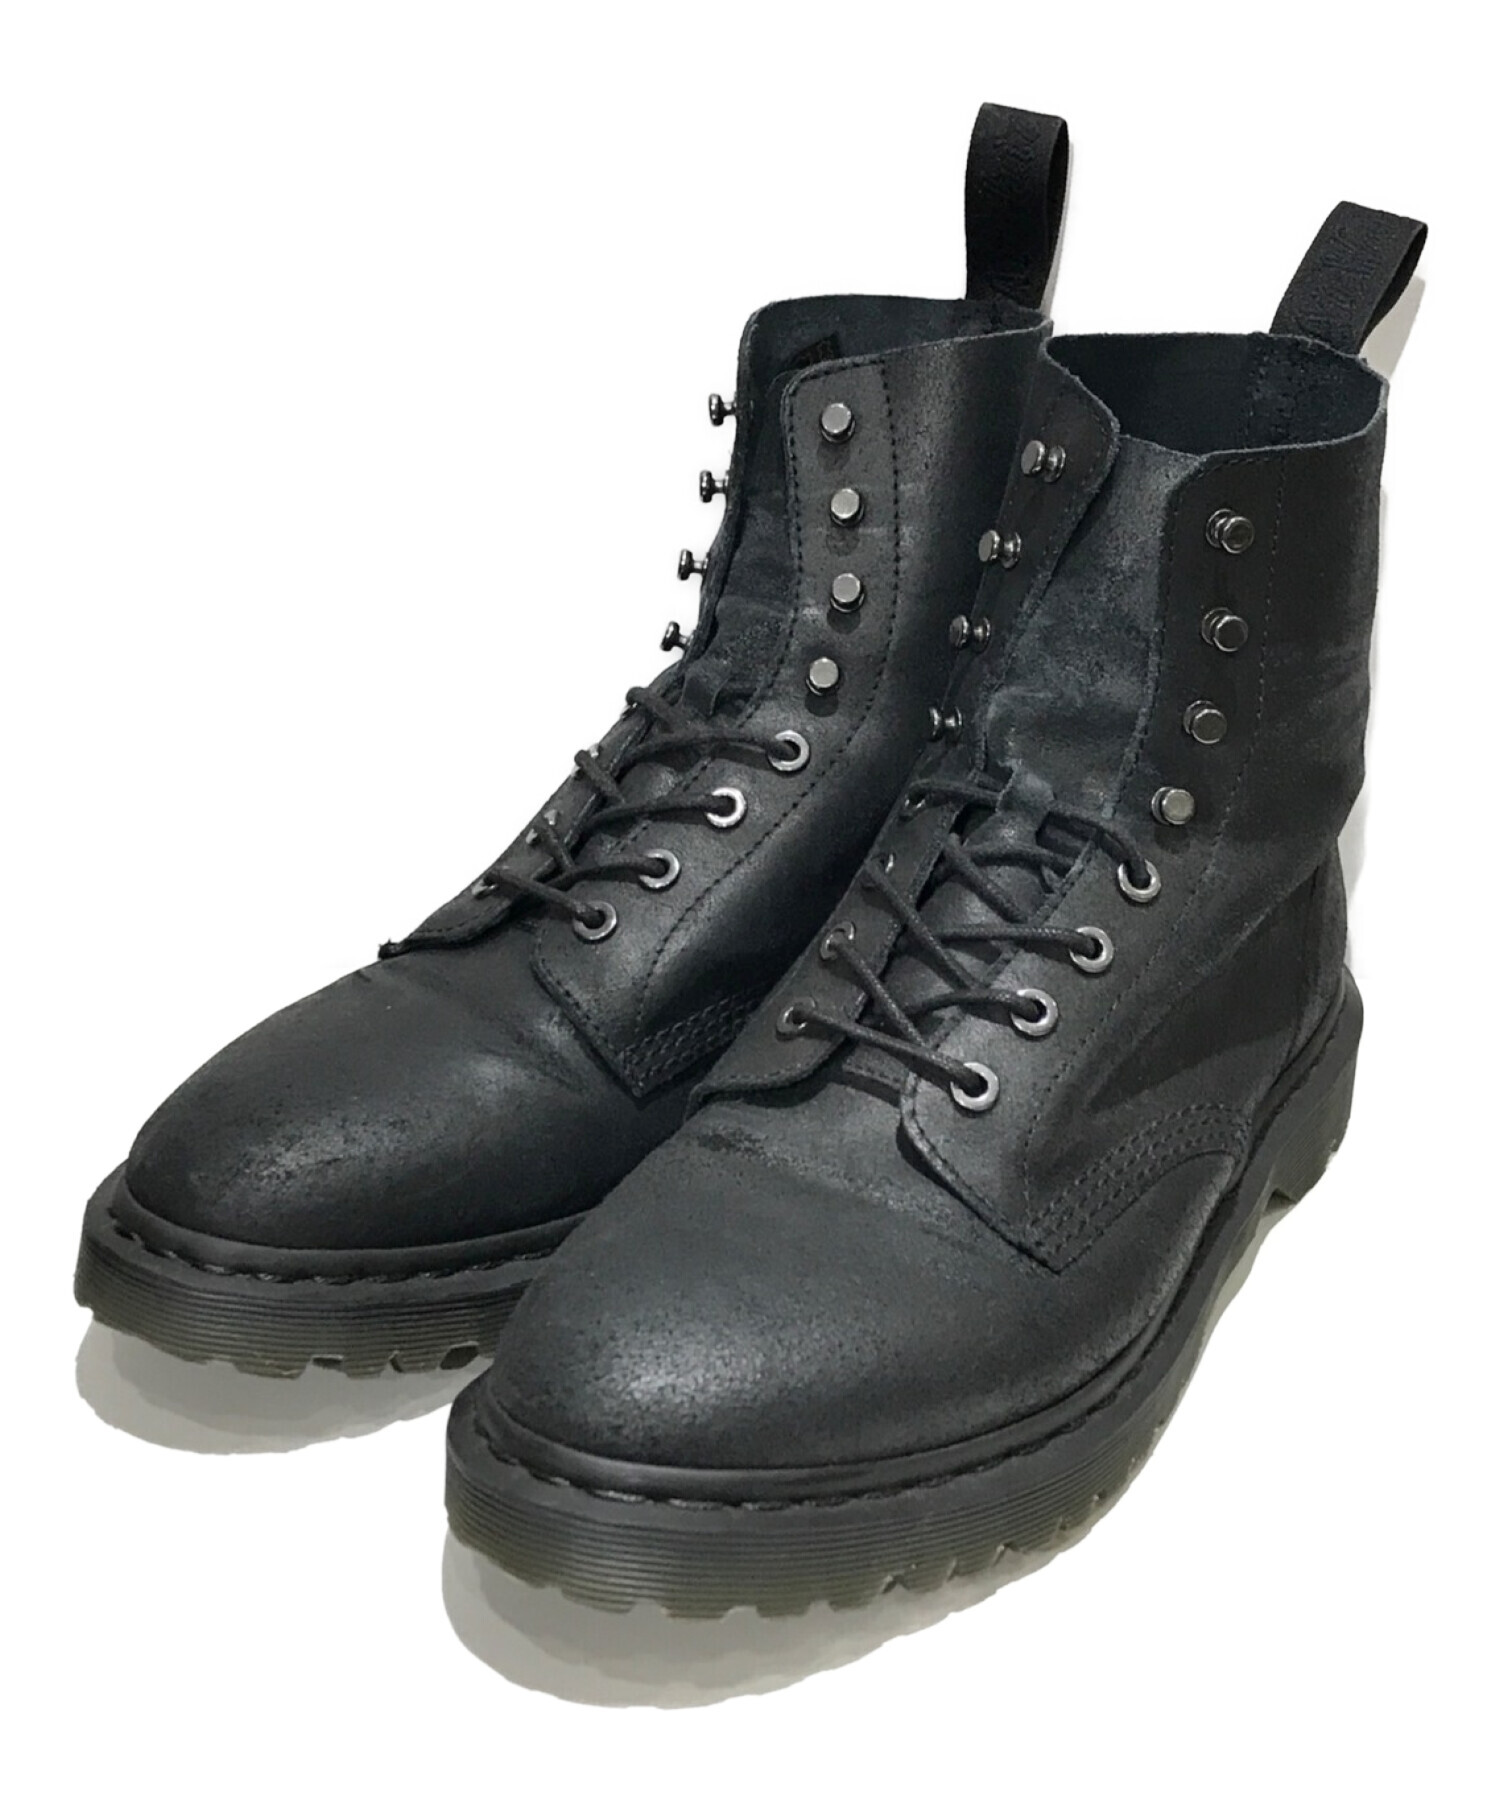 Dr.Martens◇レースアップブーツ UK5 BLK レザー 13512006 1460 Pascal 